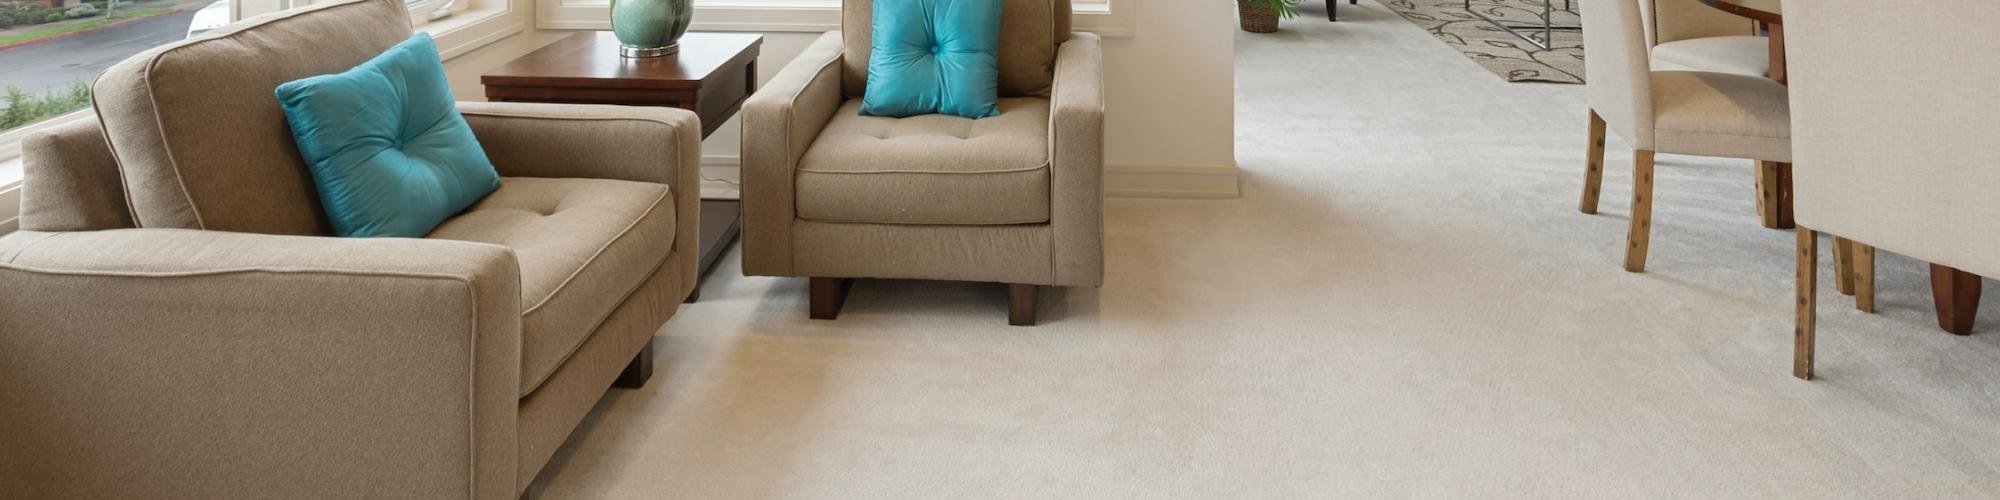 Soft looking carpet in a bright living room